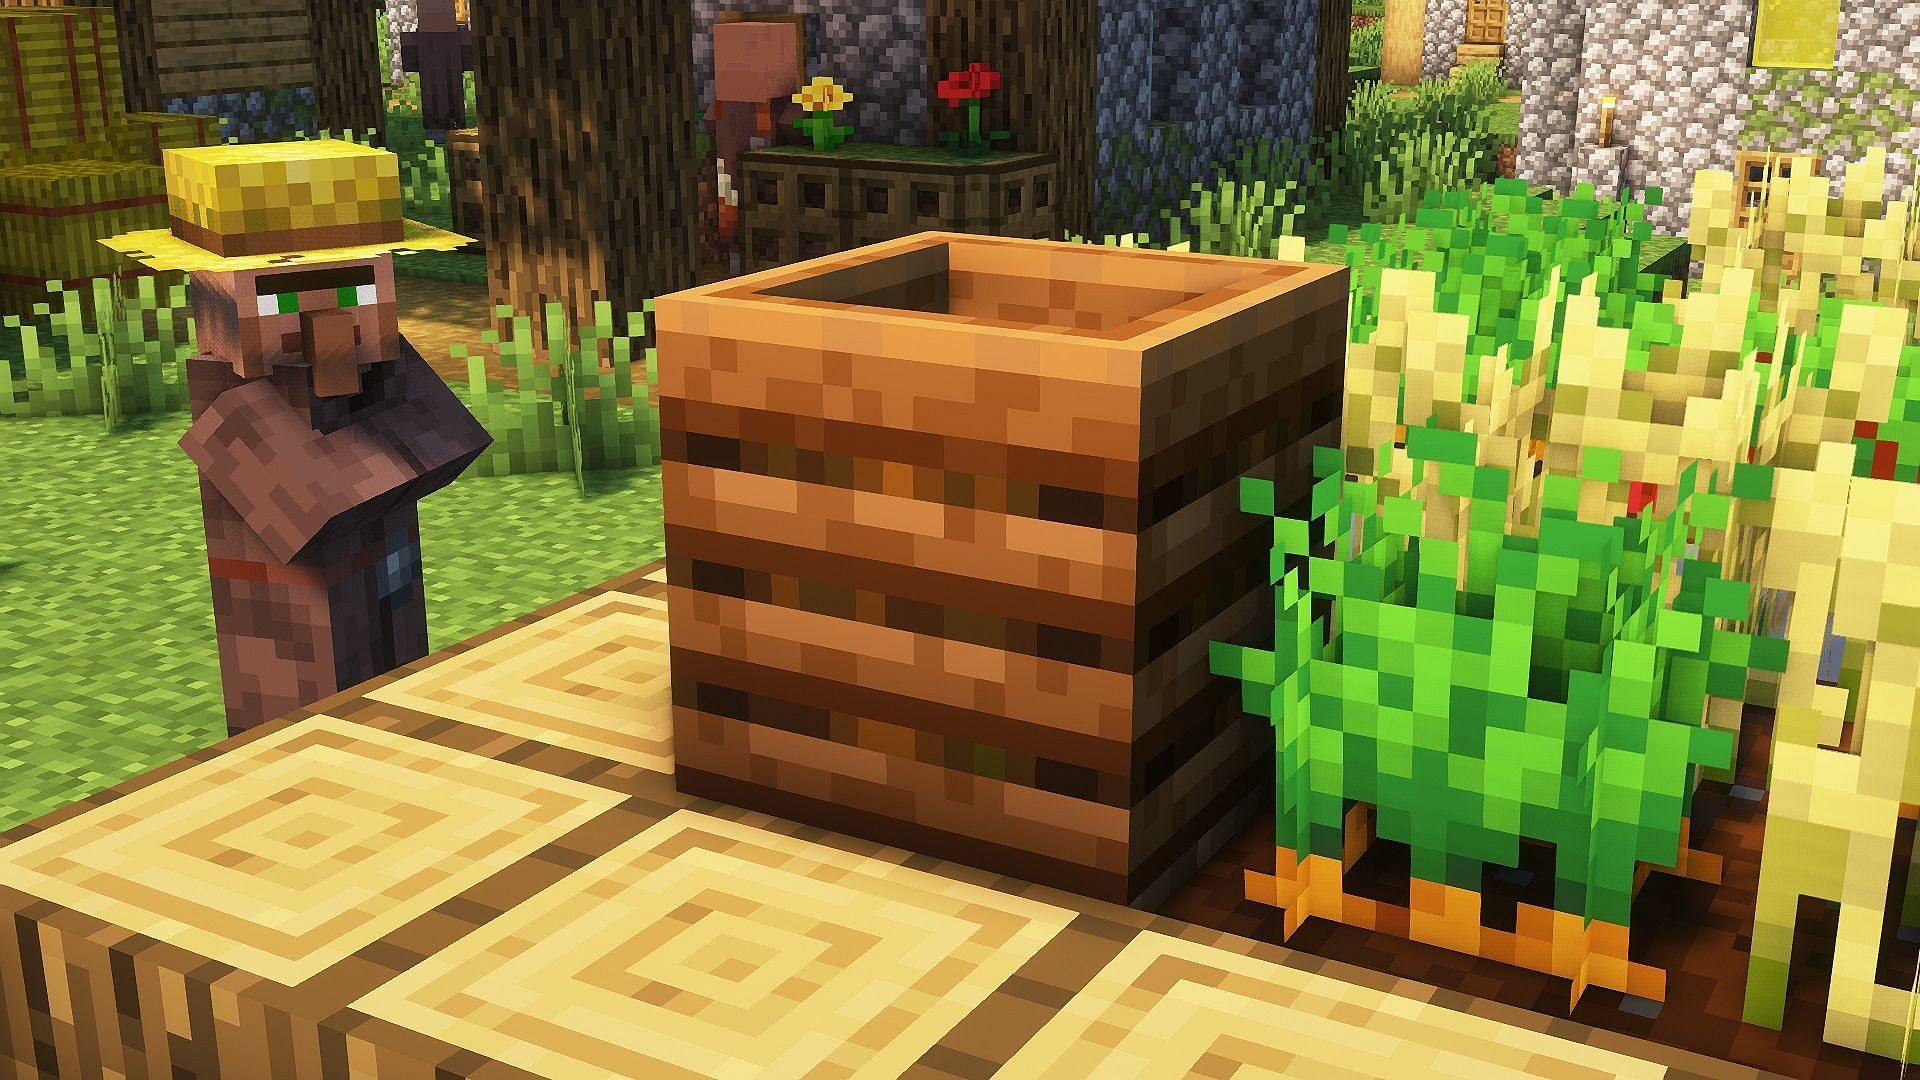 A composter in Minecraft (Image via Mojang)